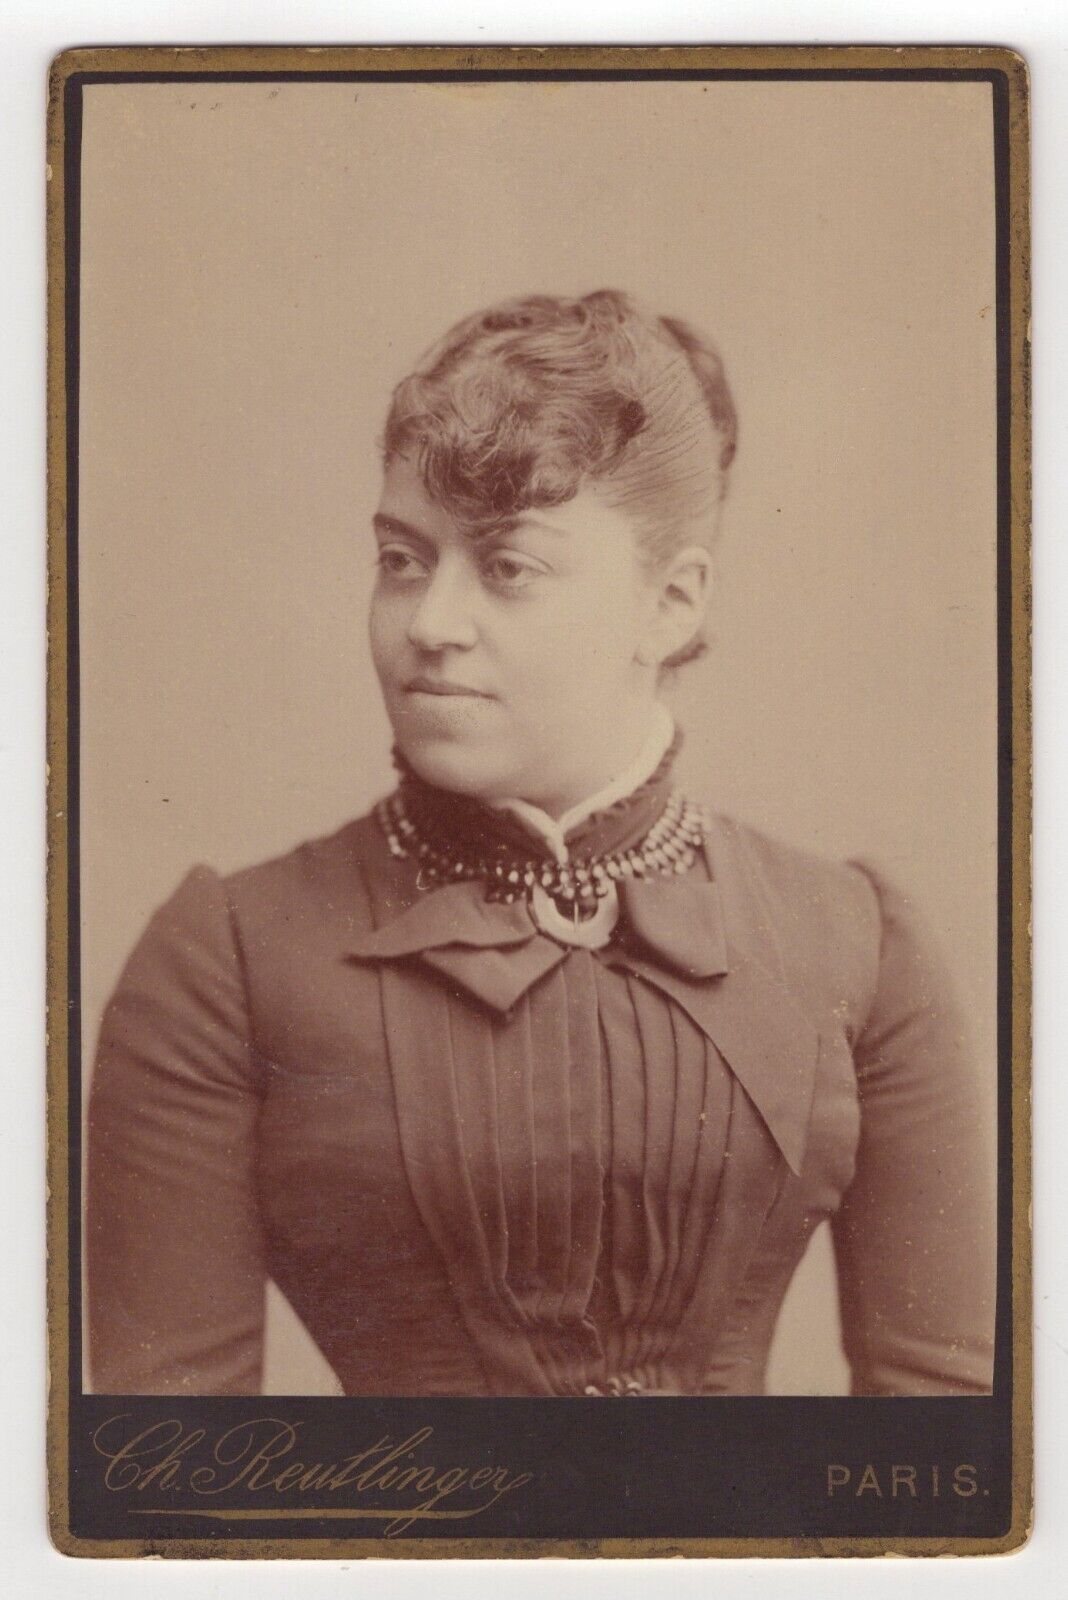 FRENCH AFRICAN WOMAN : PHOTO BY CHARLES REUTLINGER : UNCOMMON : CABINET CARD